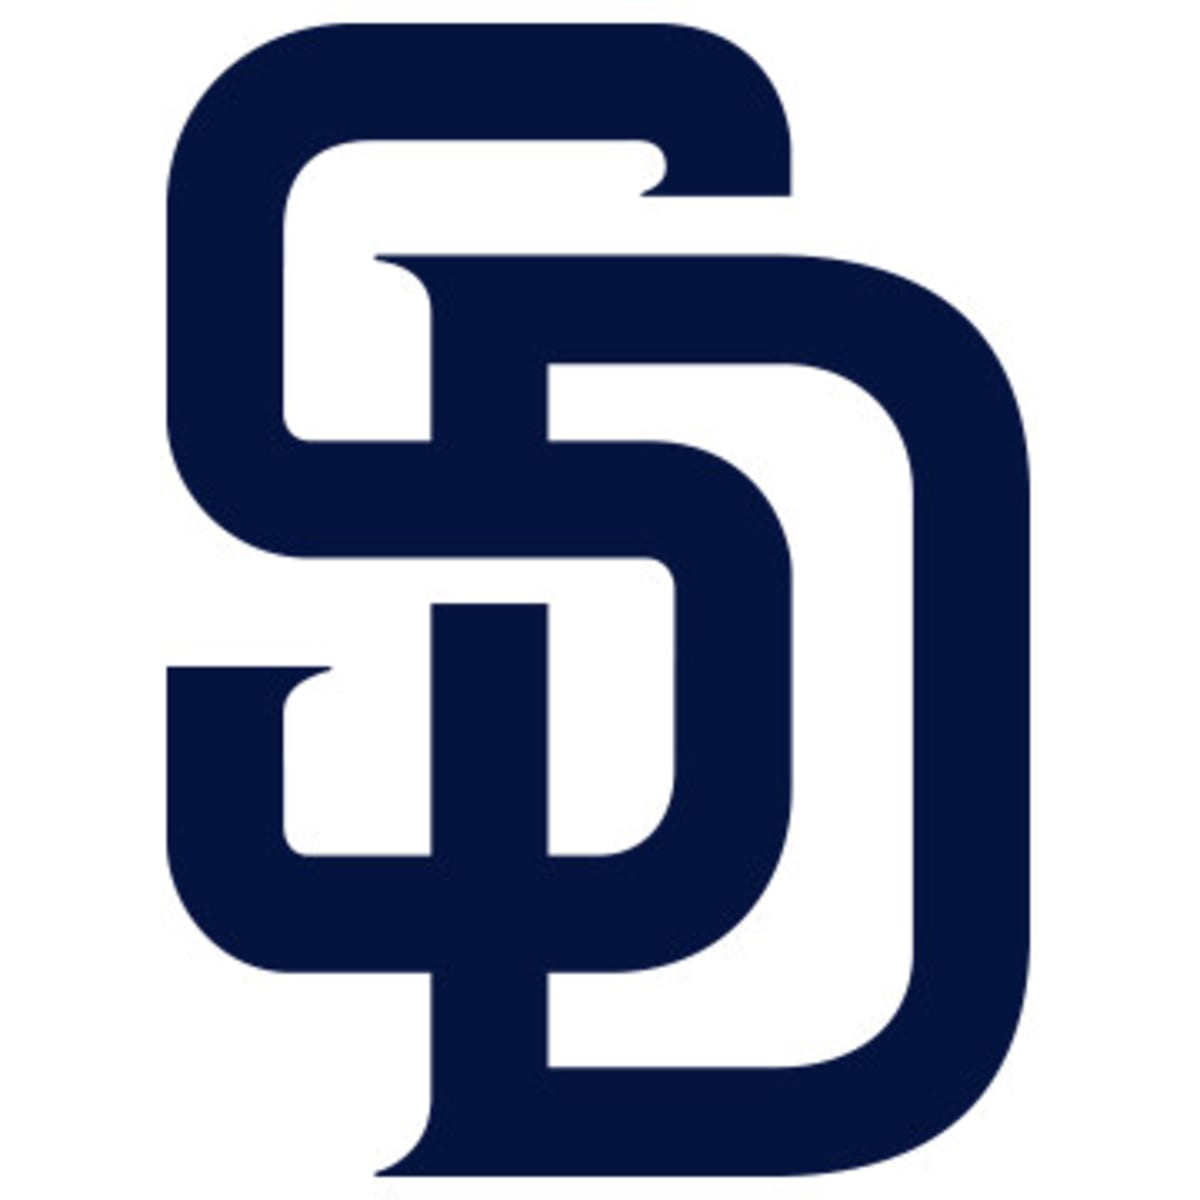 Padres News: Bright Side of SD Falling Behind to LA in Standings - Sports  Illustrated Inside The Padres News, Analysis and More